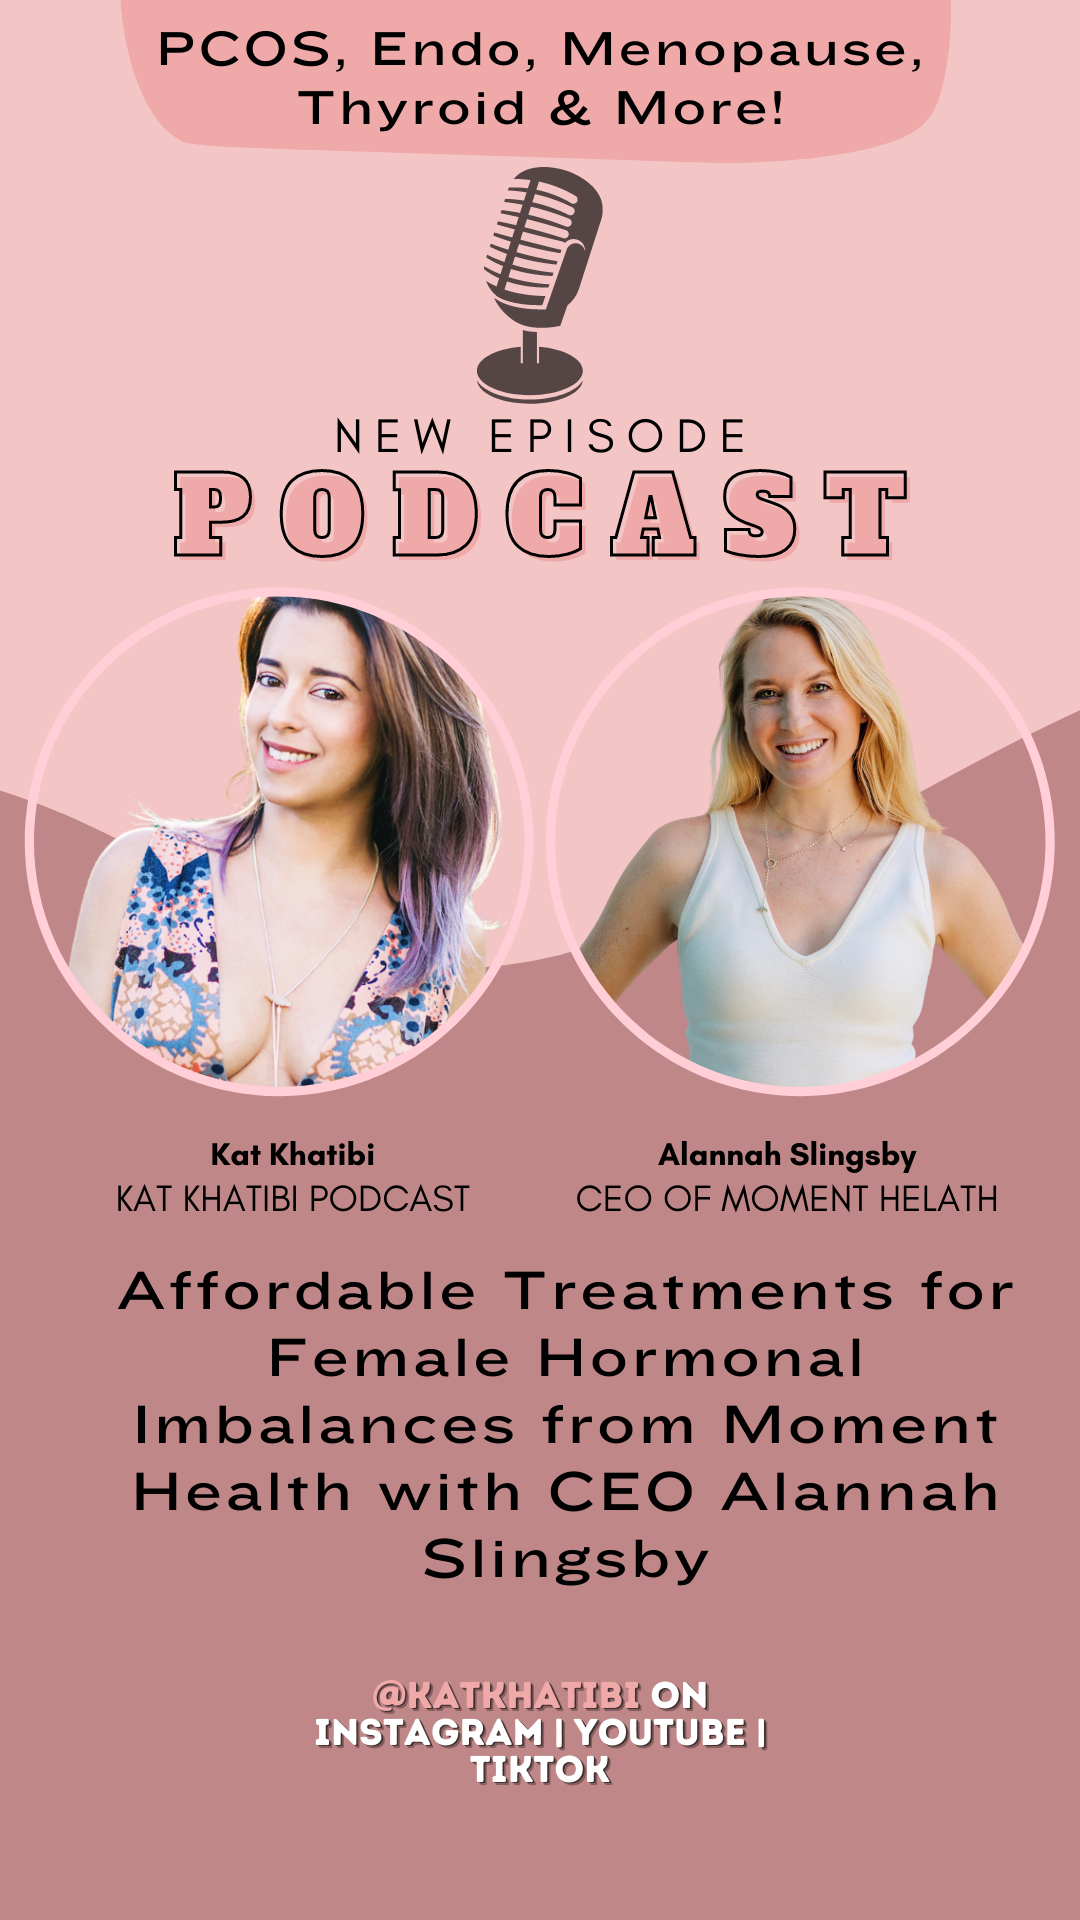 Affordable Treatments for Female Hormonal Imbalances from Moment Health with CEO Alannah Slingsby